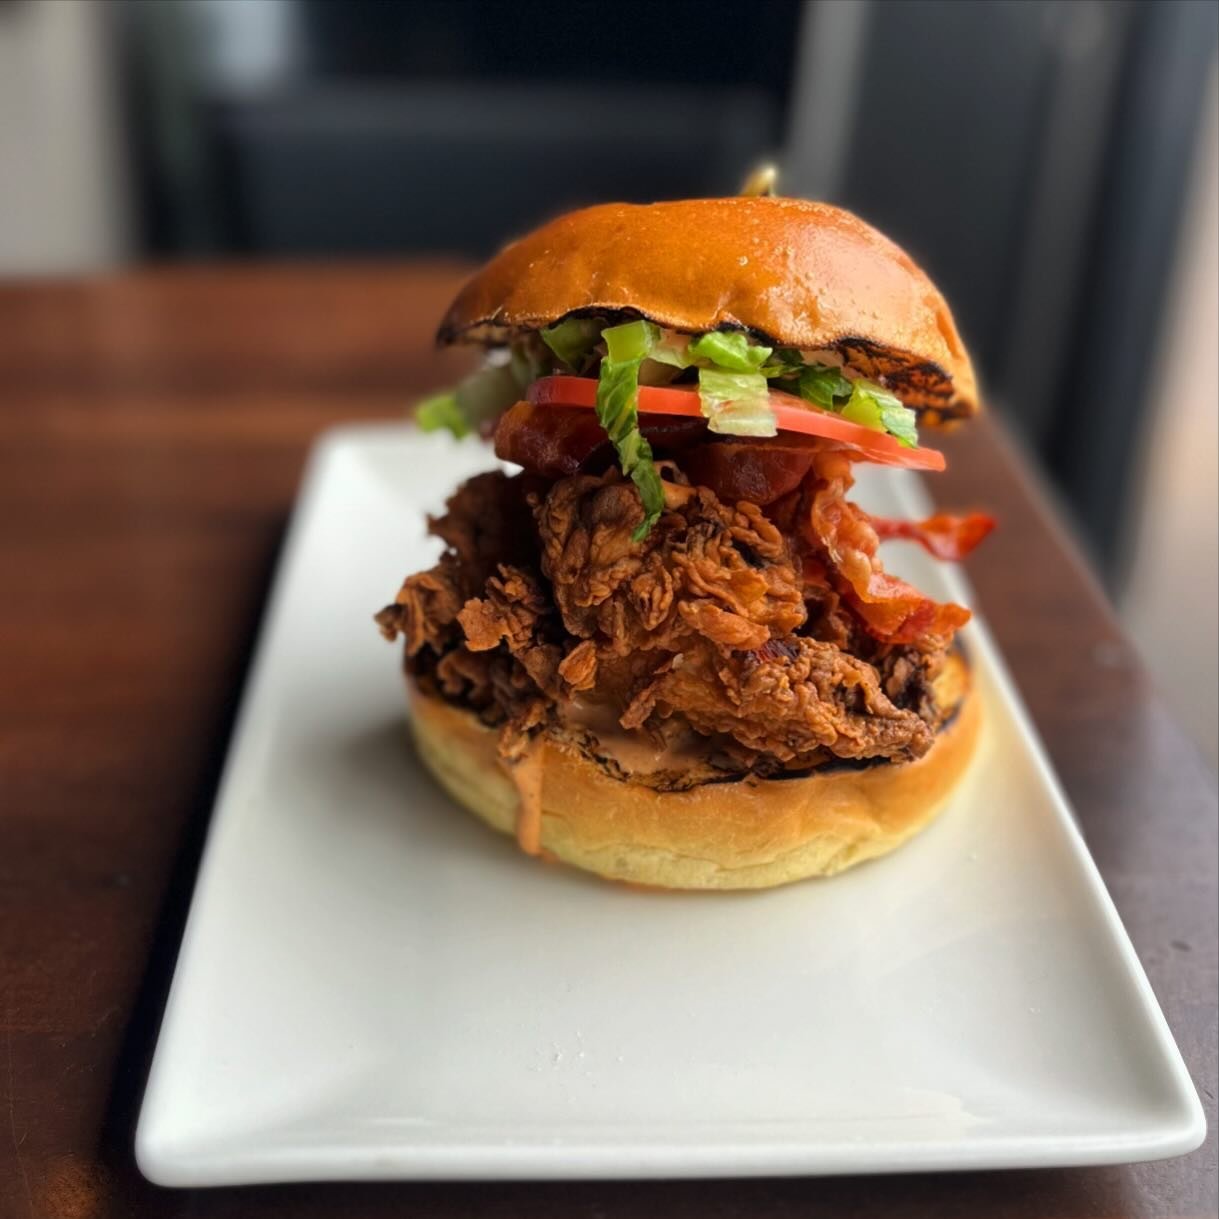 Fried Chicken Sandwich 

Spicy Ranch, Bacon, Lettuce, Tomato 

Available Monday - Saturday till 4PM. 
. 
 
&bull;
&bull;
#publickhouse #westfield #mountainside #gastropub #food #happyhour #lunch